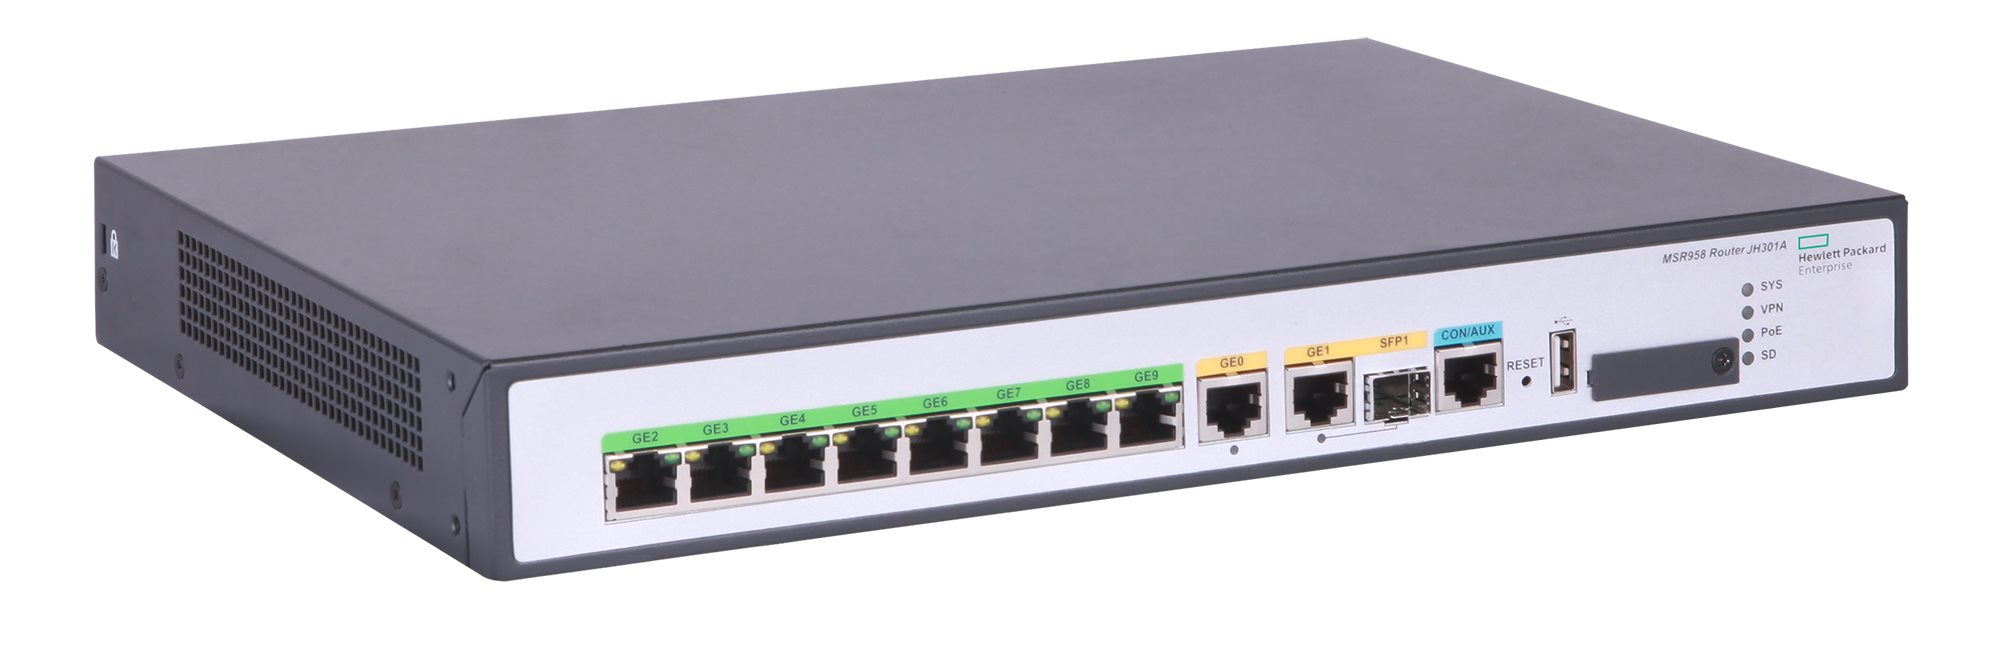 HPE FlexNetwork MSR958 1GbE and Combo 2GbE WAN 8GbE LAN Router0 